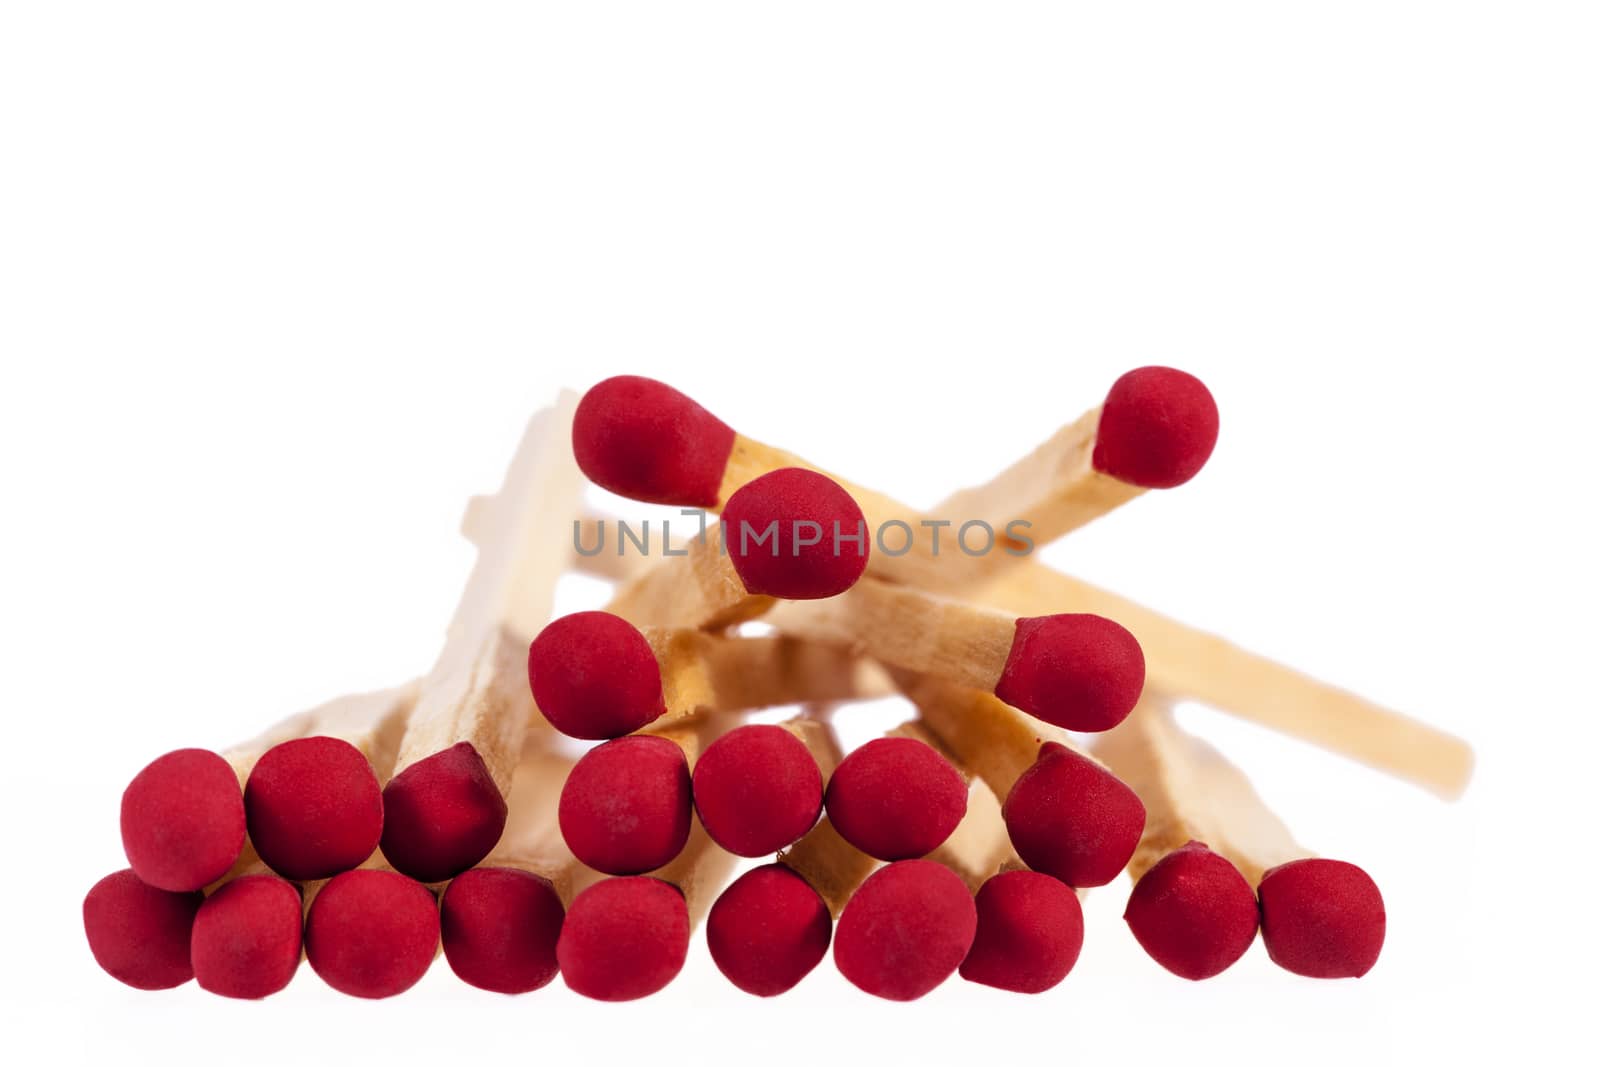 Heap of matches with rad heads isolated on white background, close up